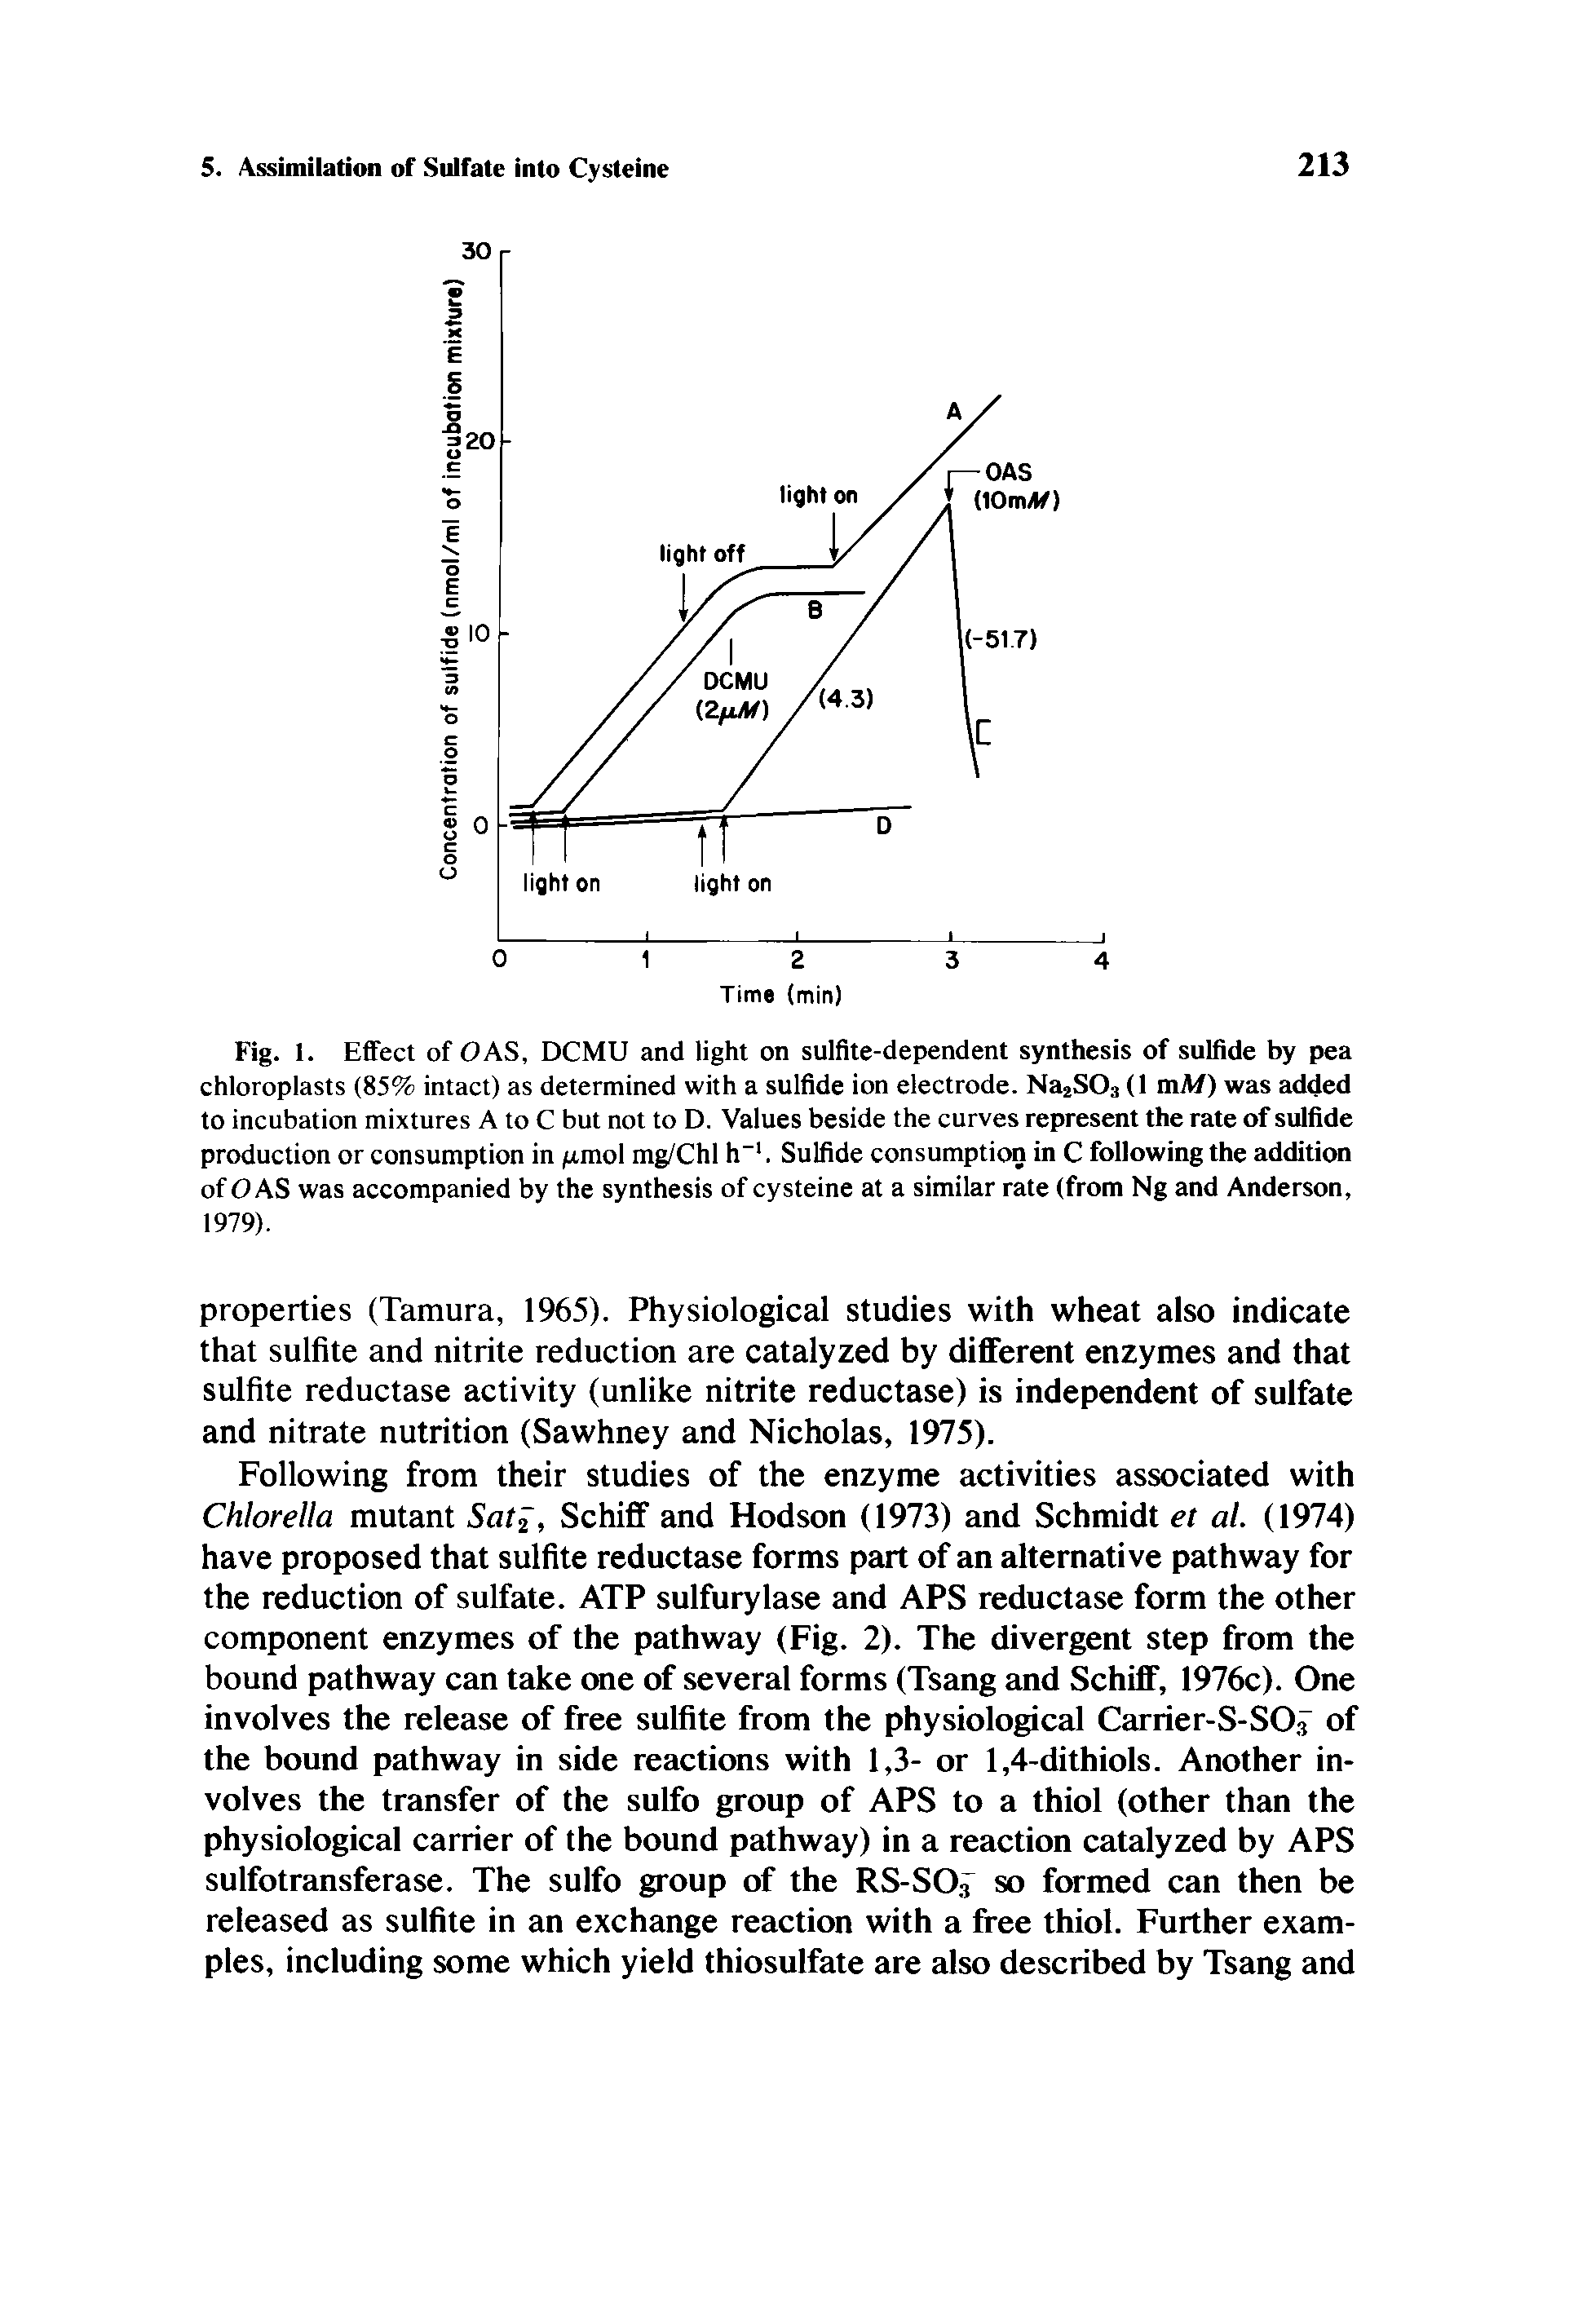 Fig. 1. Effect of OAS, DCMU and light on sulfite-dependent synthesis of sulfide by pea chloroplasts (85% intact) as determined with a sulfide ion electrode. NaaSOa (1 mM) was added to incubation mixtures A to C but not to D. Values beside the curves represent the rate of sulfide production or consumption in /nmol mg/Chl h . Sulfide consumption in C following the addition of OAS was accompanied by the synthesis of cysteine at a similar rate (from Ng and Anderson, 1979).